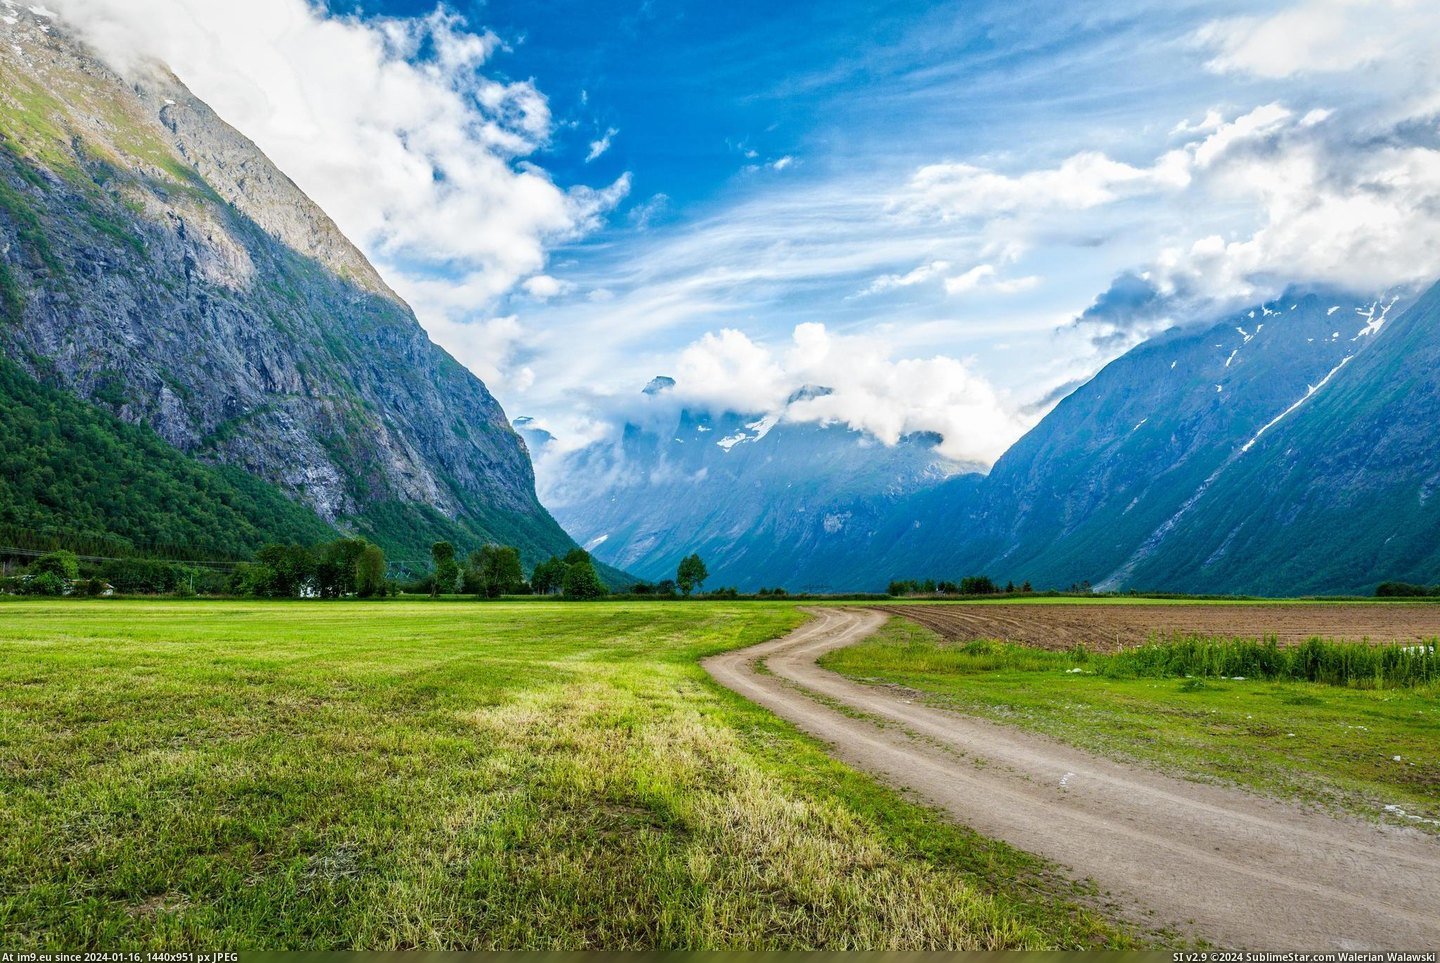 #Road #Simple #Norway [Pics] A simple road in Norway Pic. (Obraz z album My r/PICS favs))